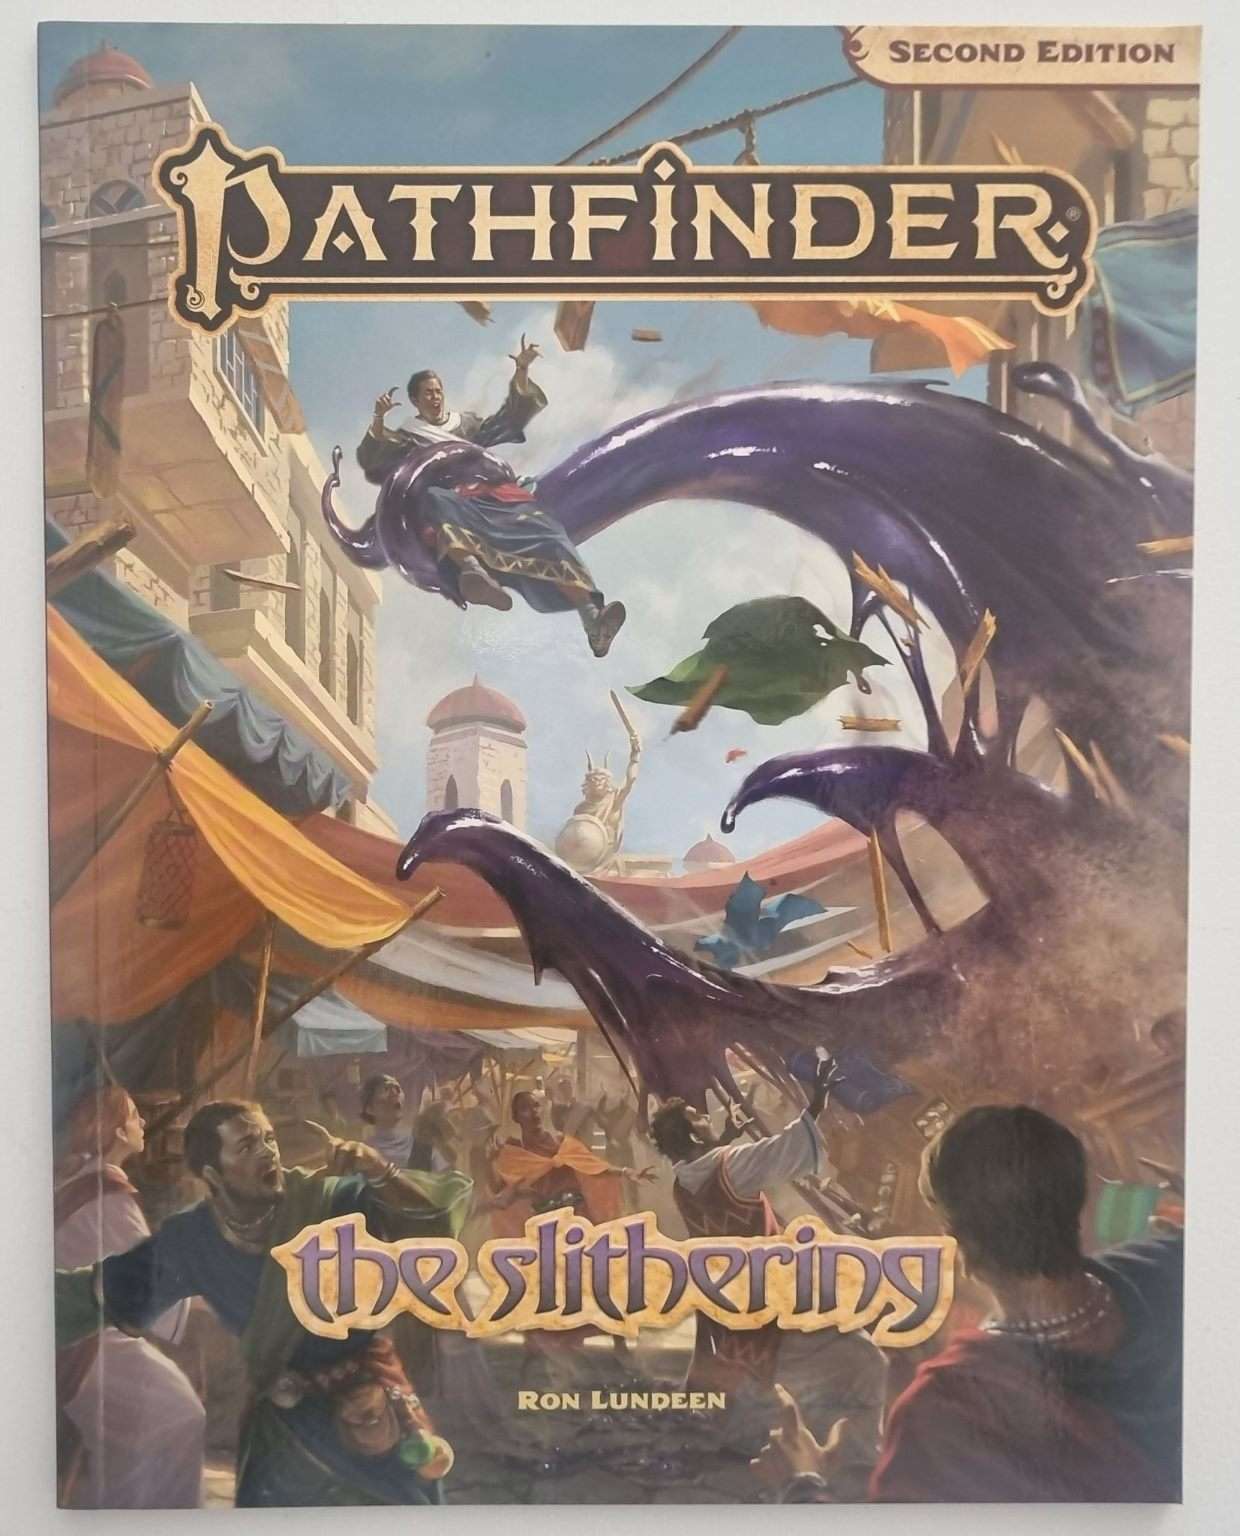 Pathfinder: The Slithering - Second Edition Adventure (2e)